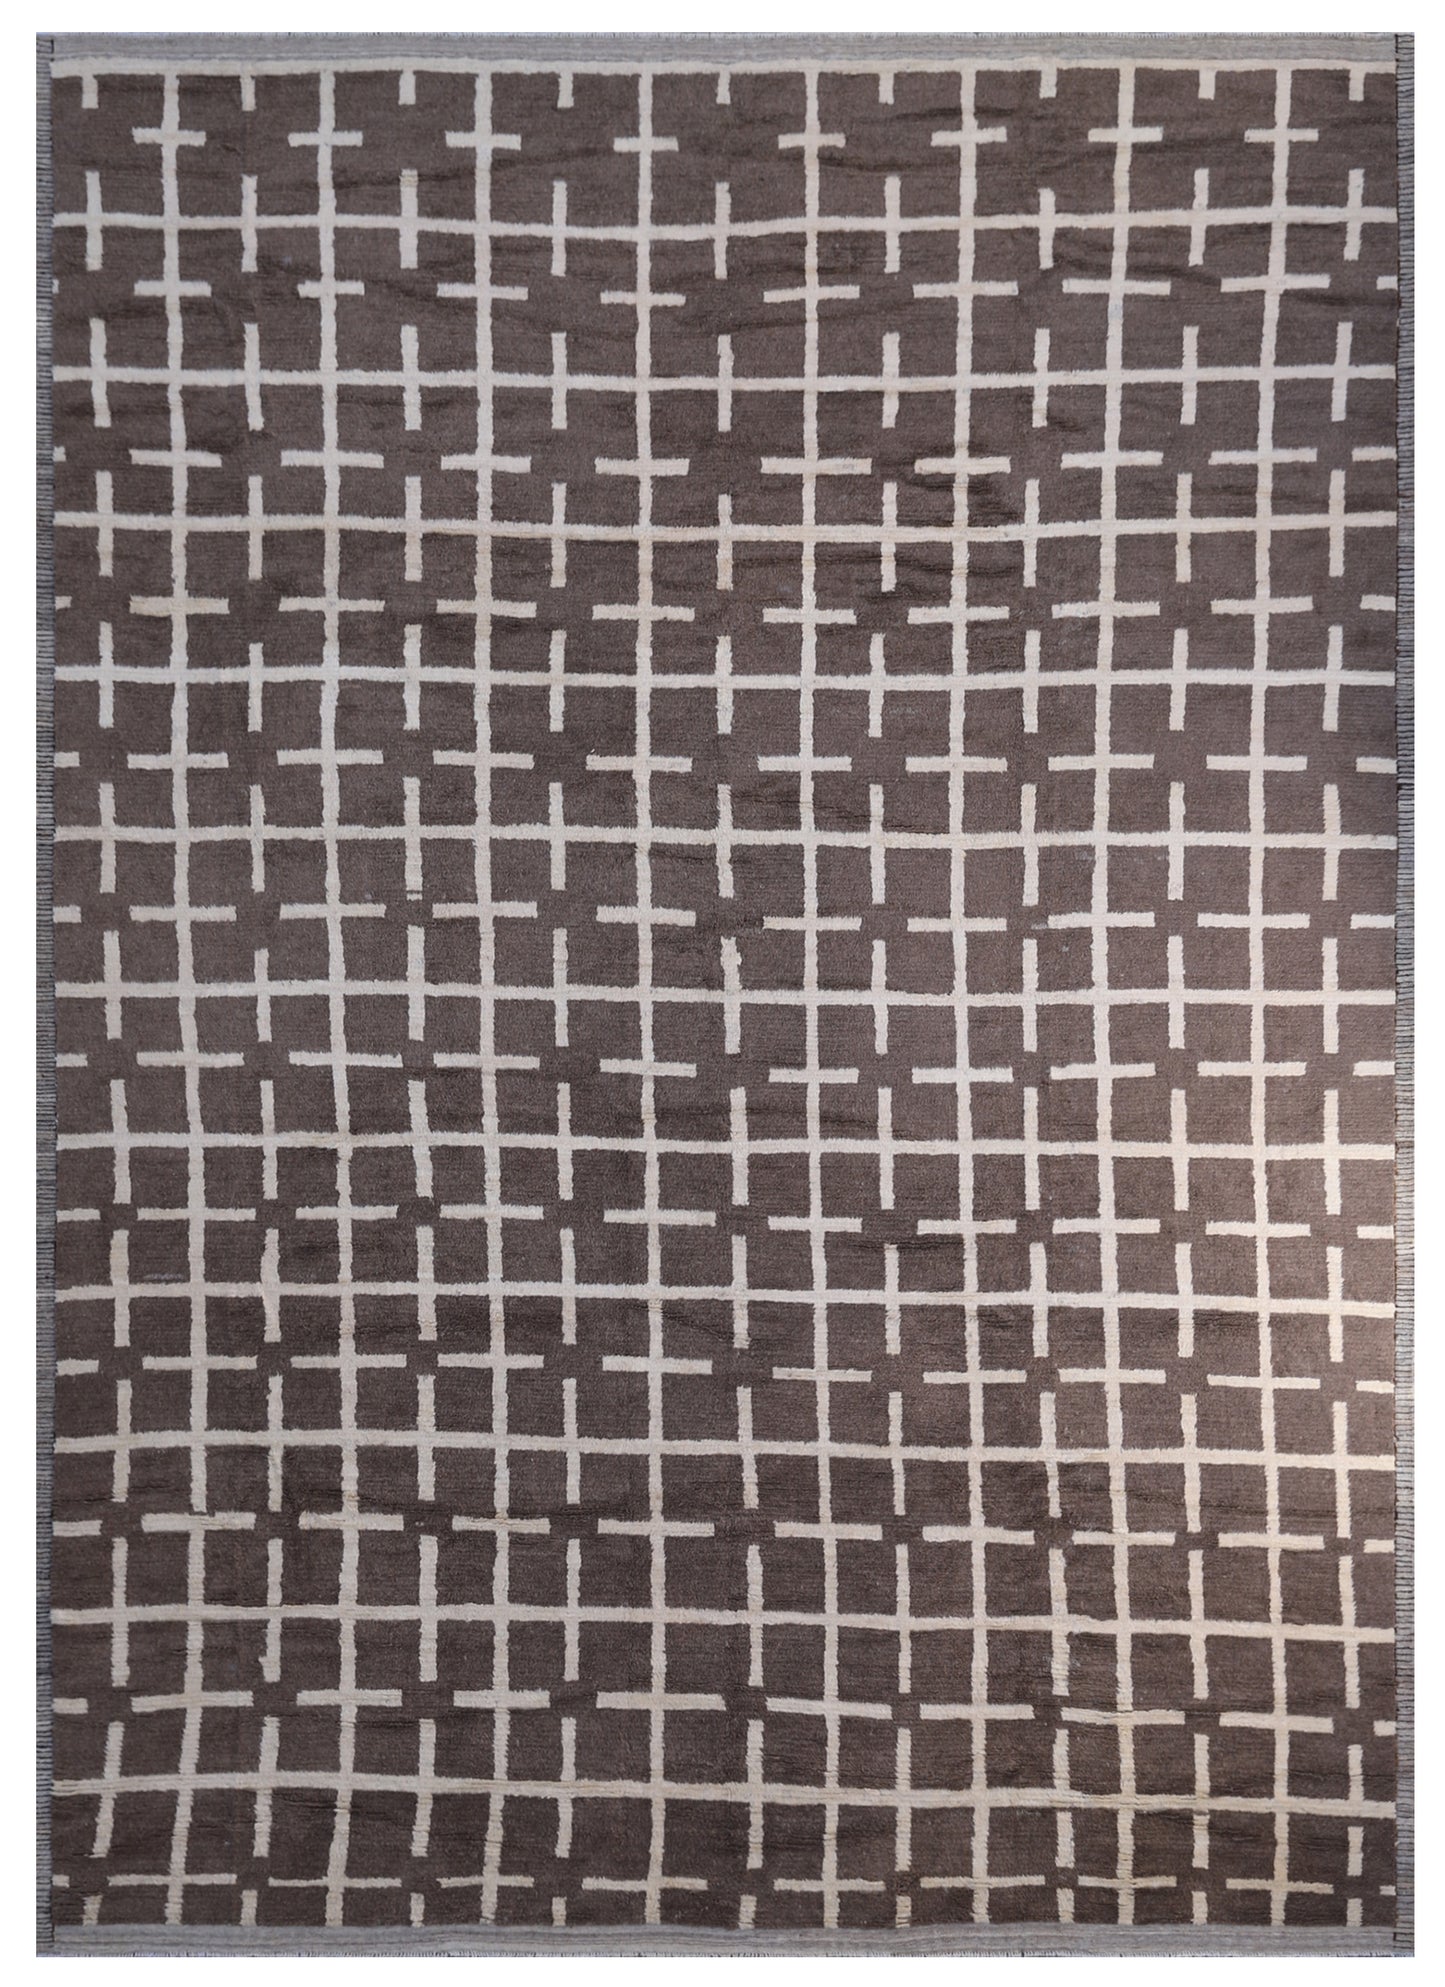 12'x16' Ariana Moroccan Style Brown and White Geometric Soft Shaggy Barchi Area Rug